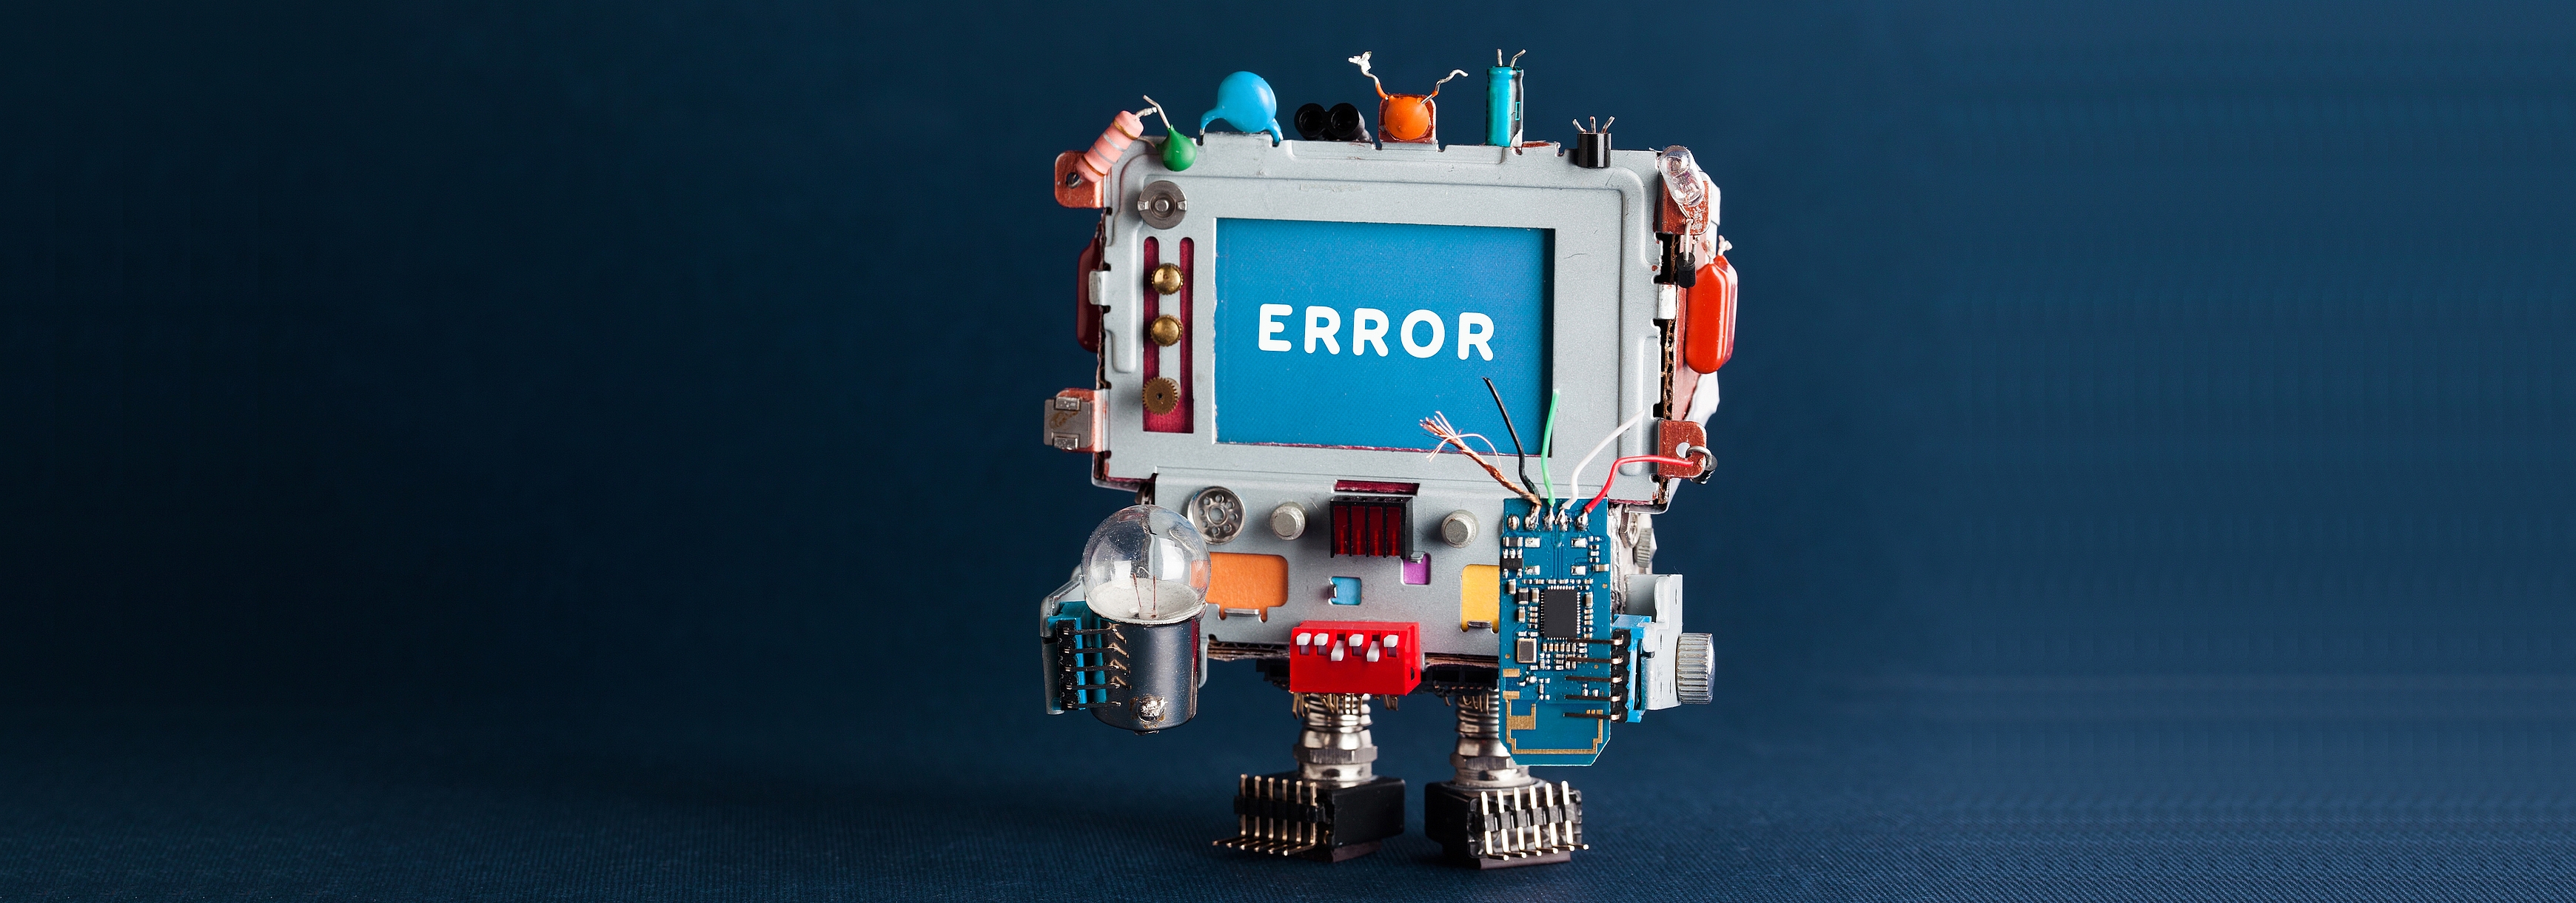 Toy robot computer with light bulb and defective circuit on dark blue background, with a head showing the text message Error on blue screen.